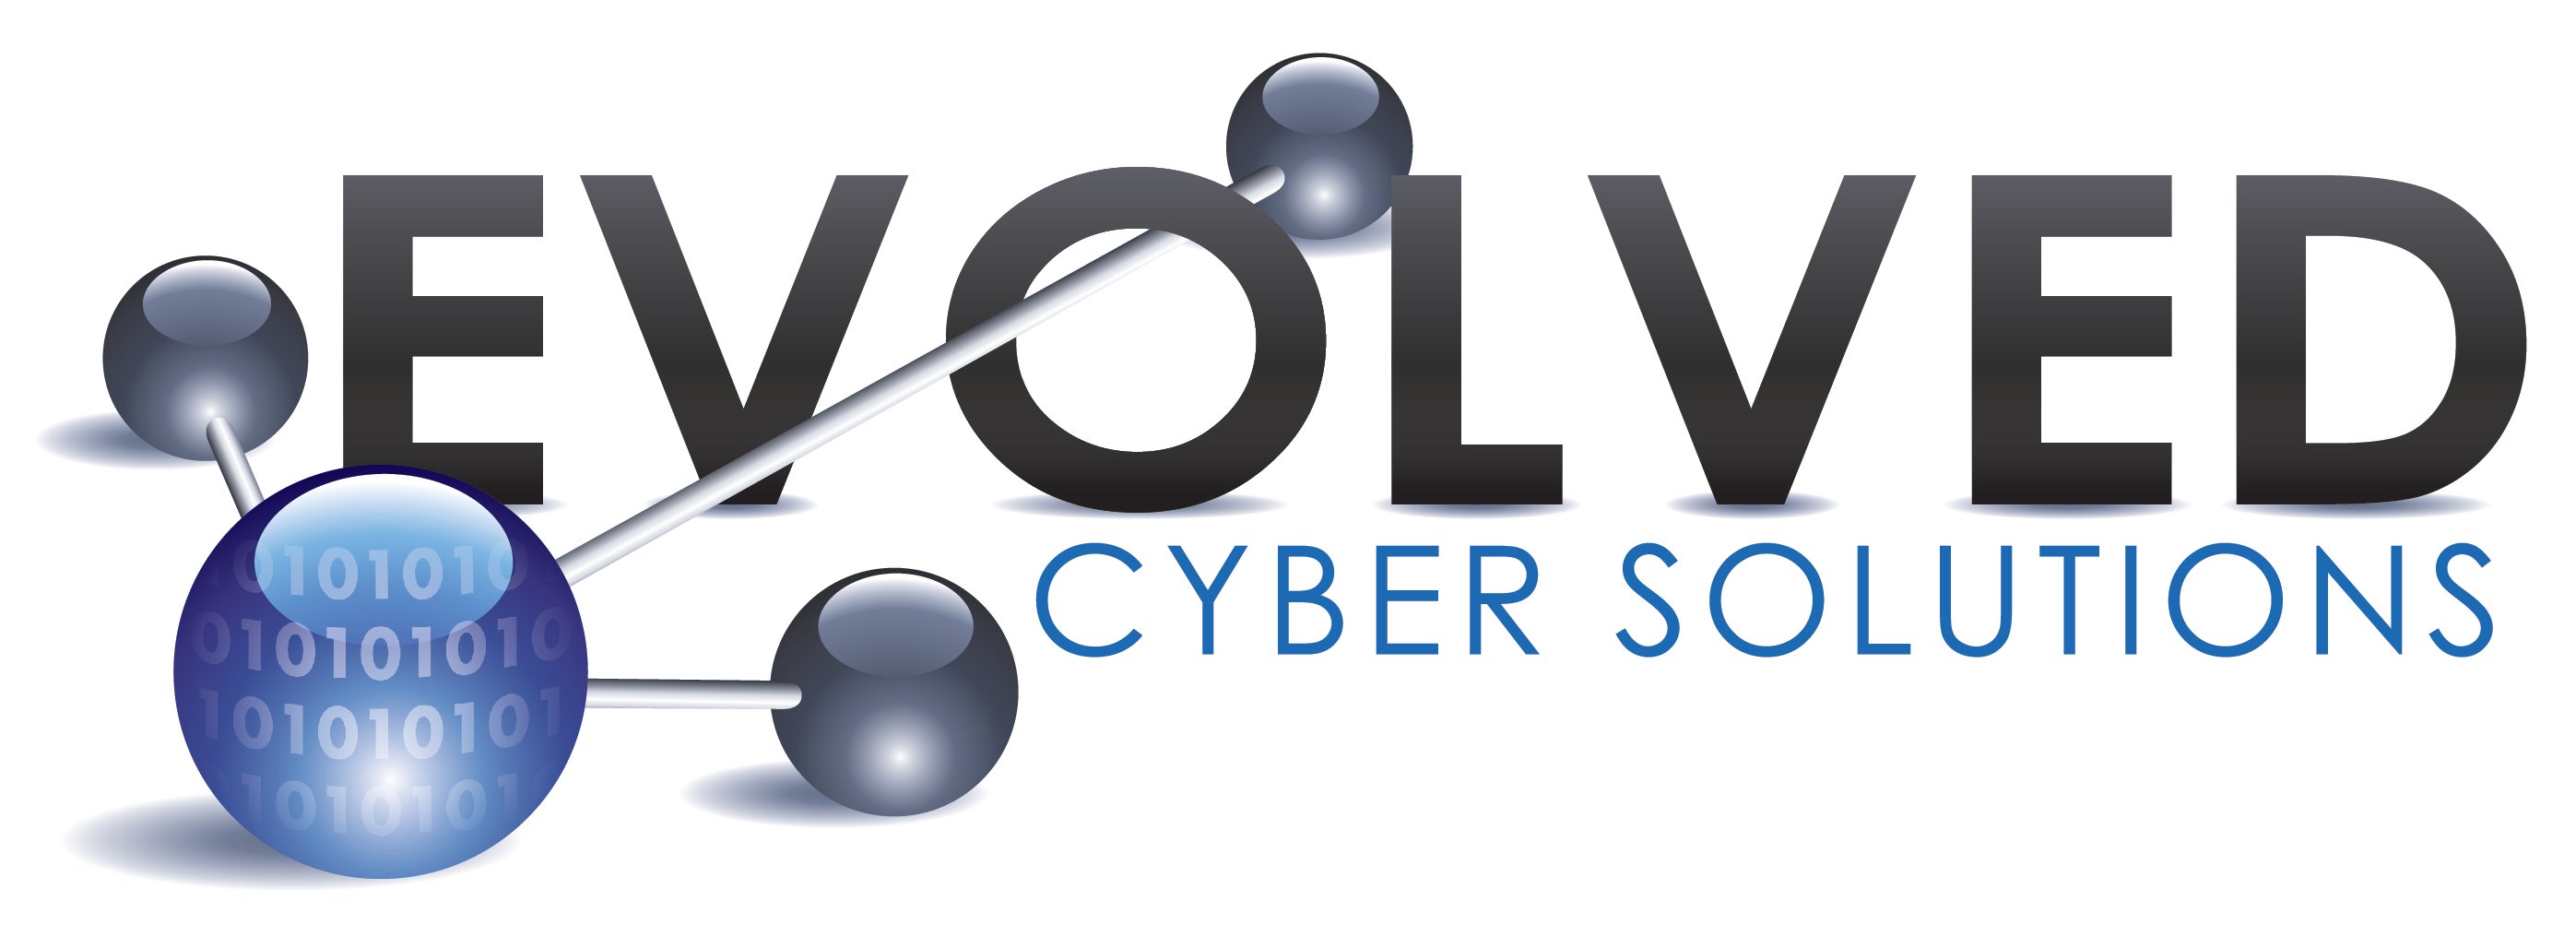 Evolved Cyber Solutions logo - FINAL